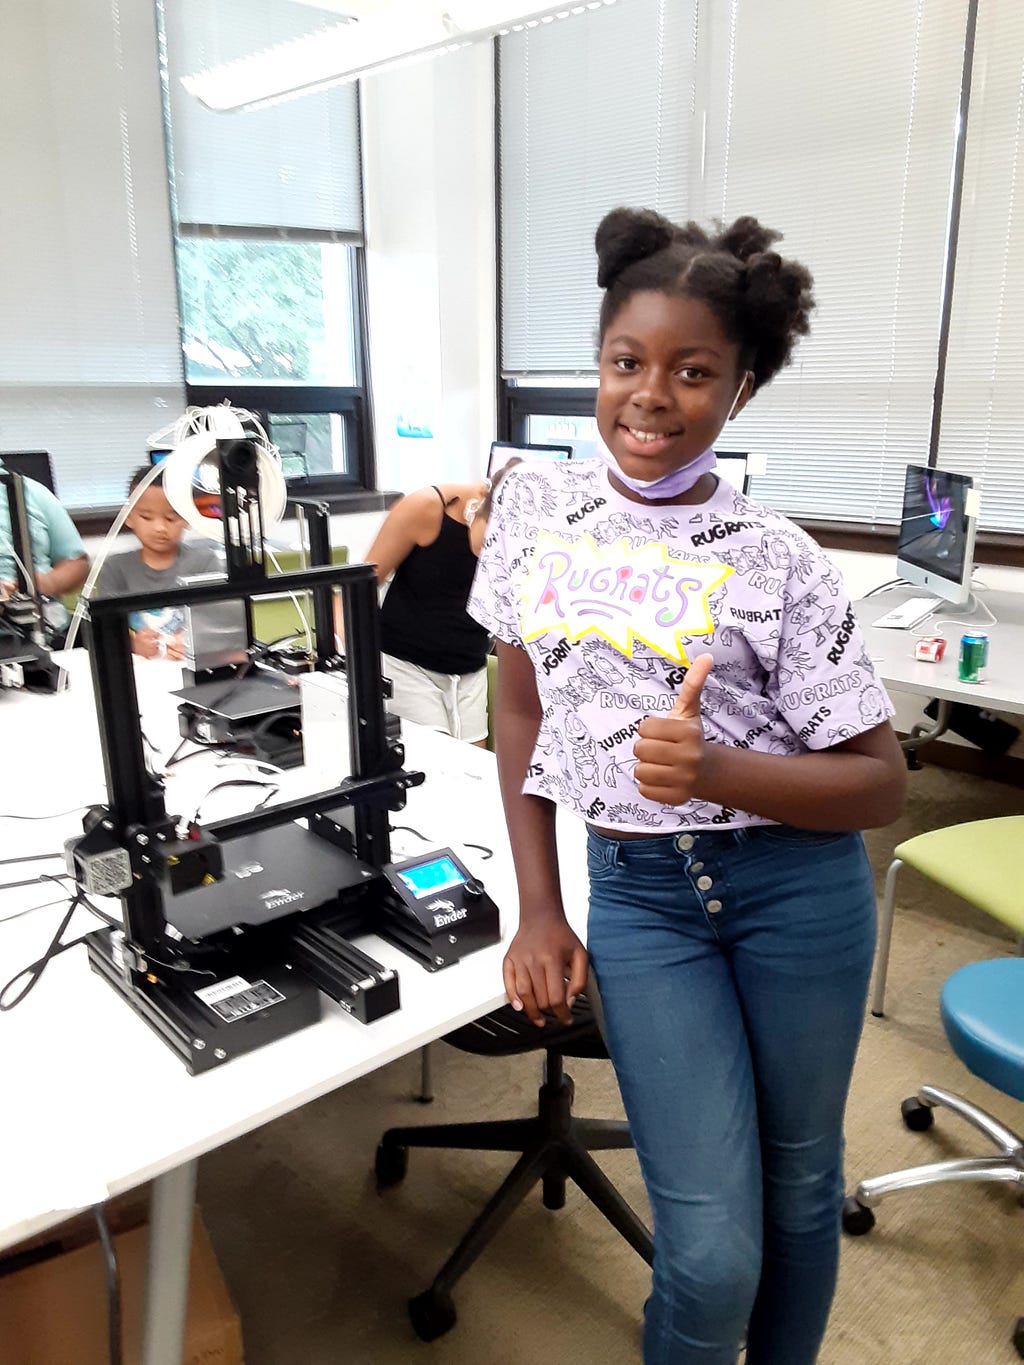 Student stands with a thumbs-up pose next to their personal Ender 3 Pro 3D printer at the Funbotics 3D Modeling and Printing Camp in July of 2021.